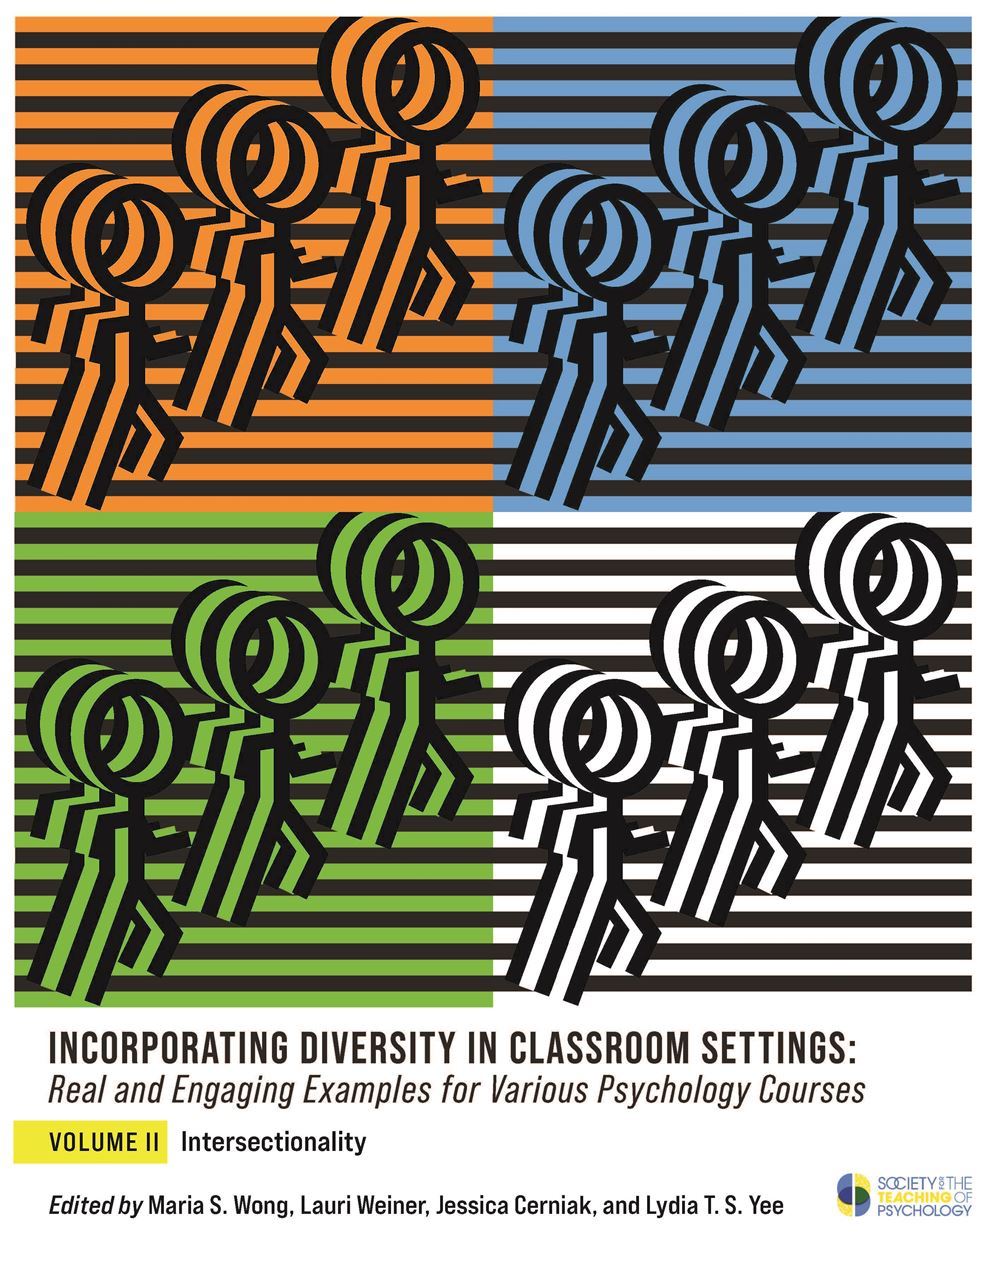 Incorporating Diversity in Classroom Settings: Real and Engaging Examples for Various Psychology Courses Volume II 